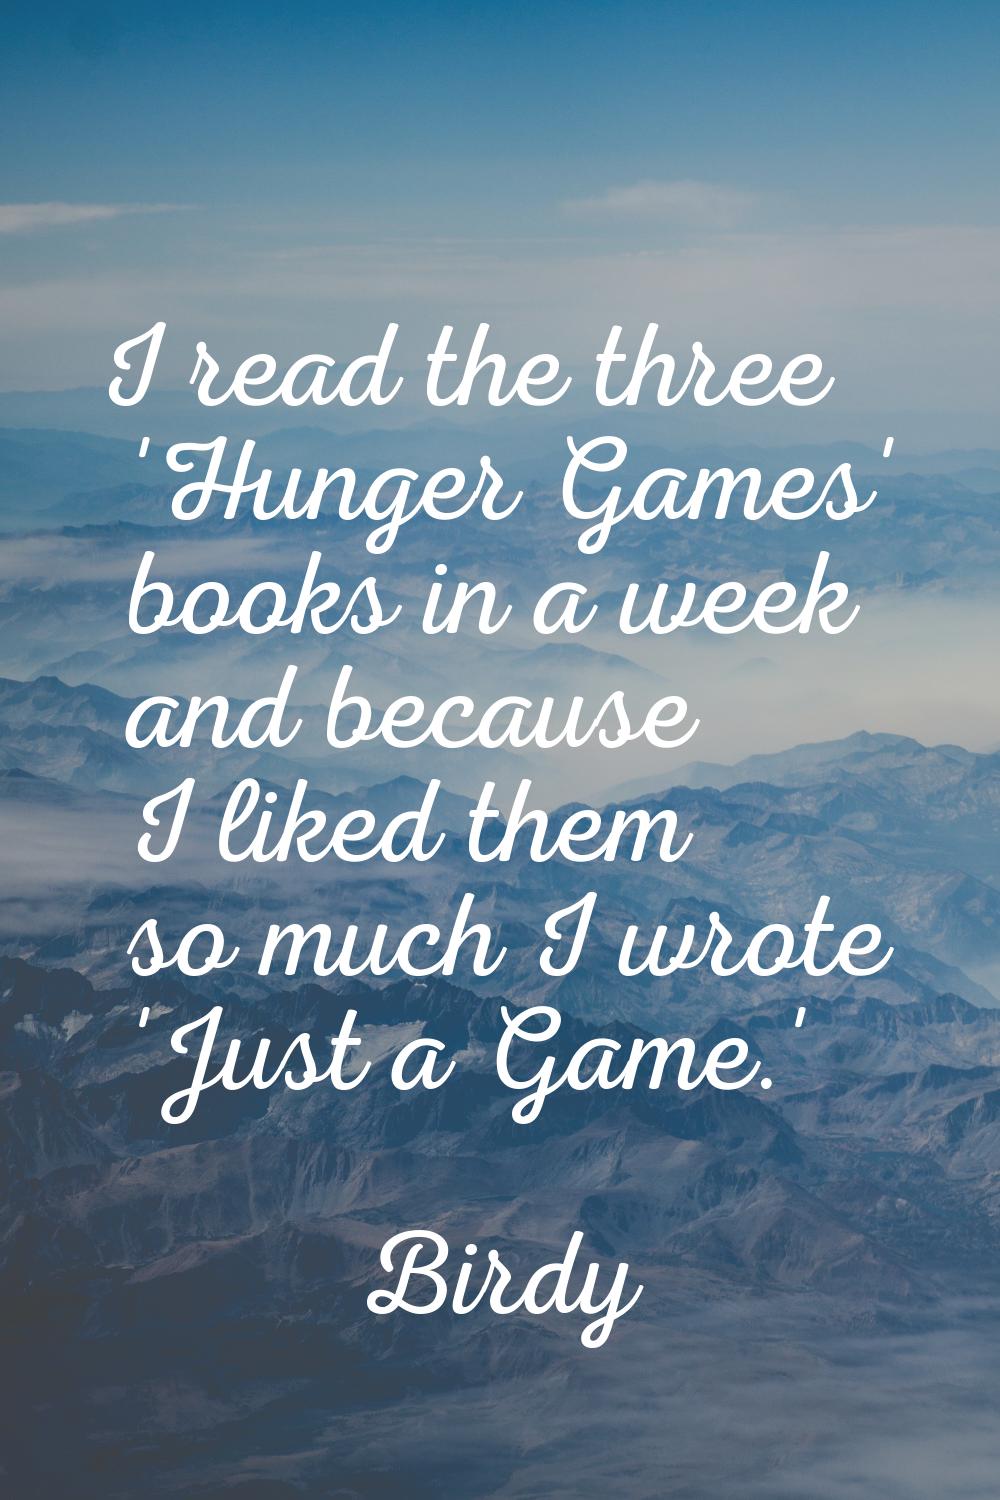 I read the three 'Hunger Games' books in a week and because I liked them so much I wrote 'Just a Ga